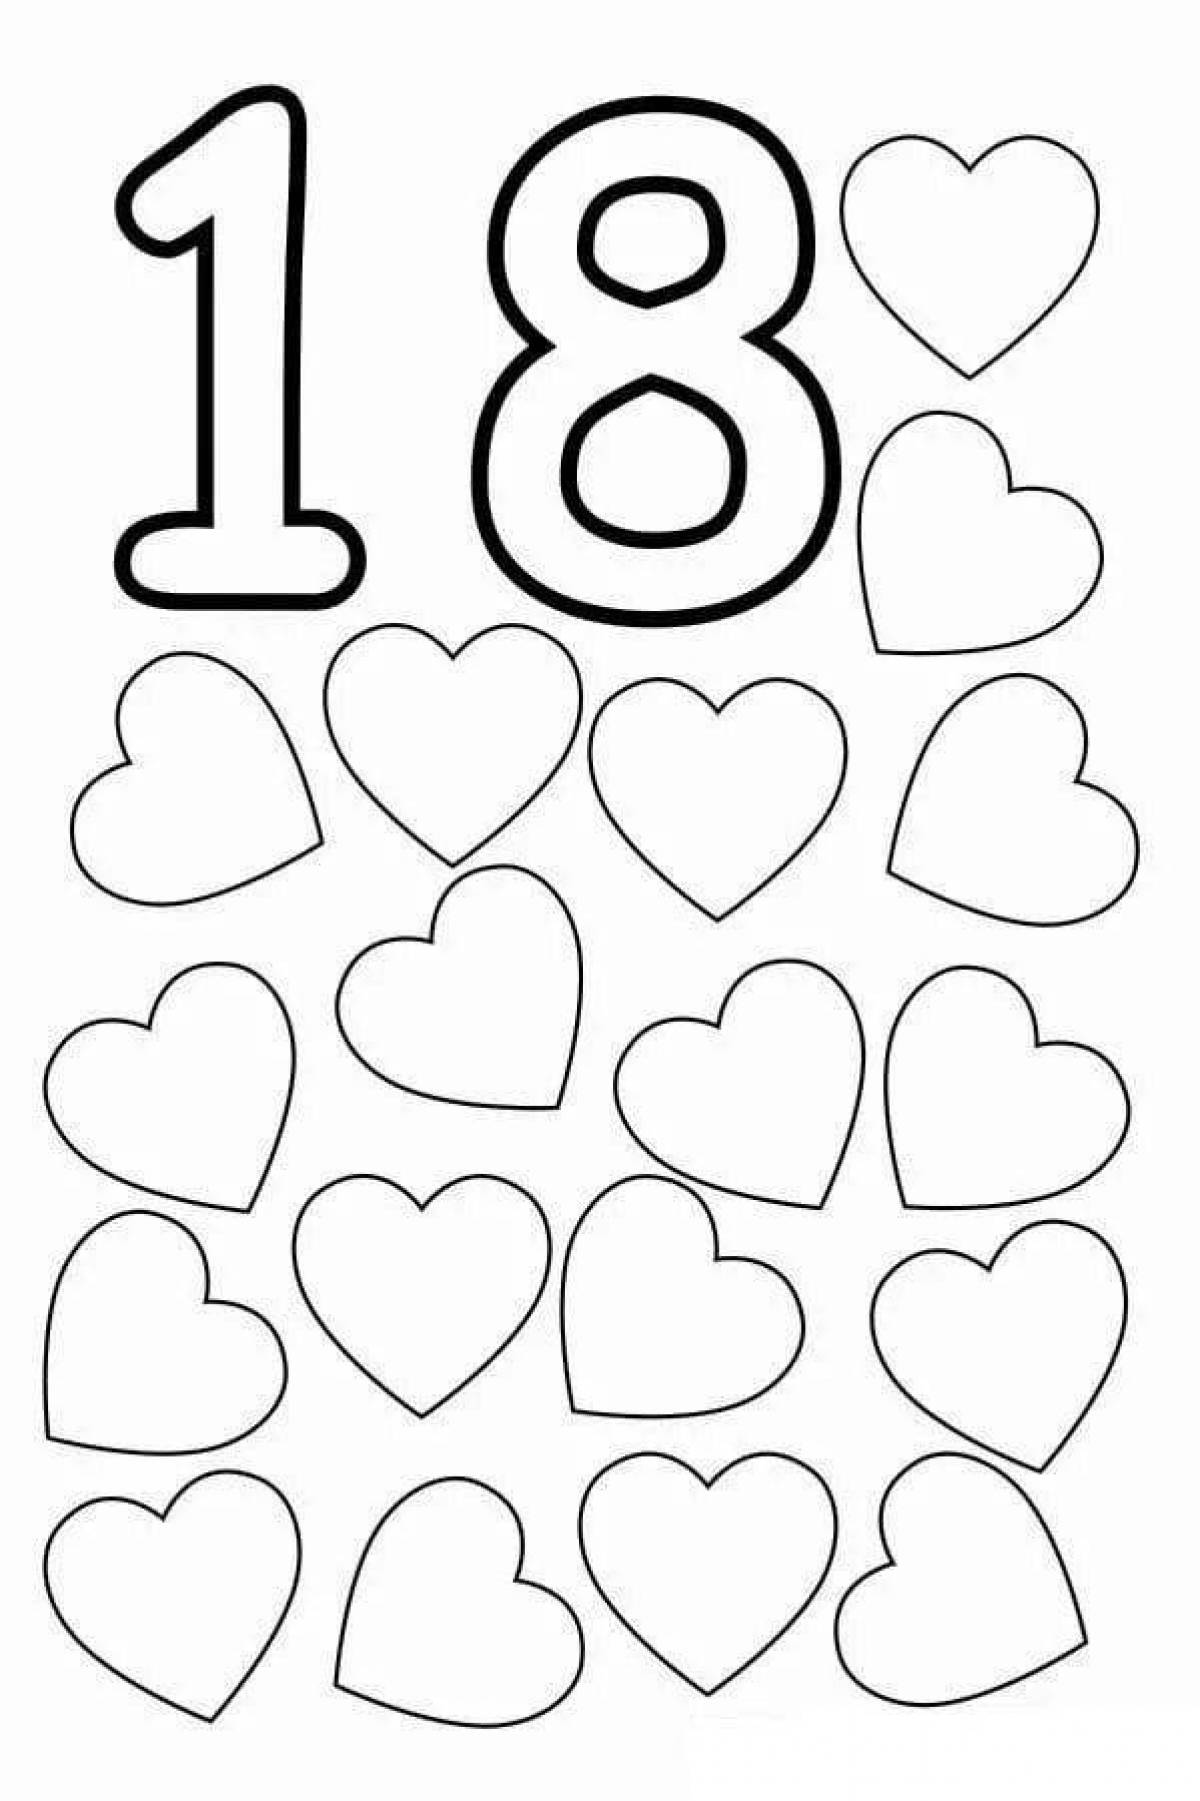 Amazing coloring page 18 plus